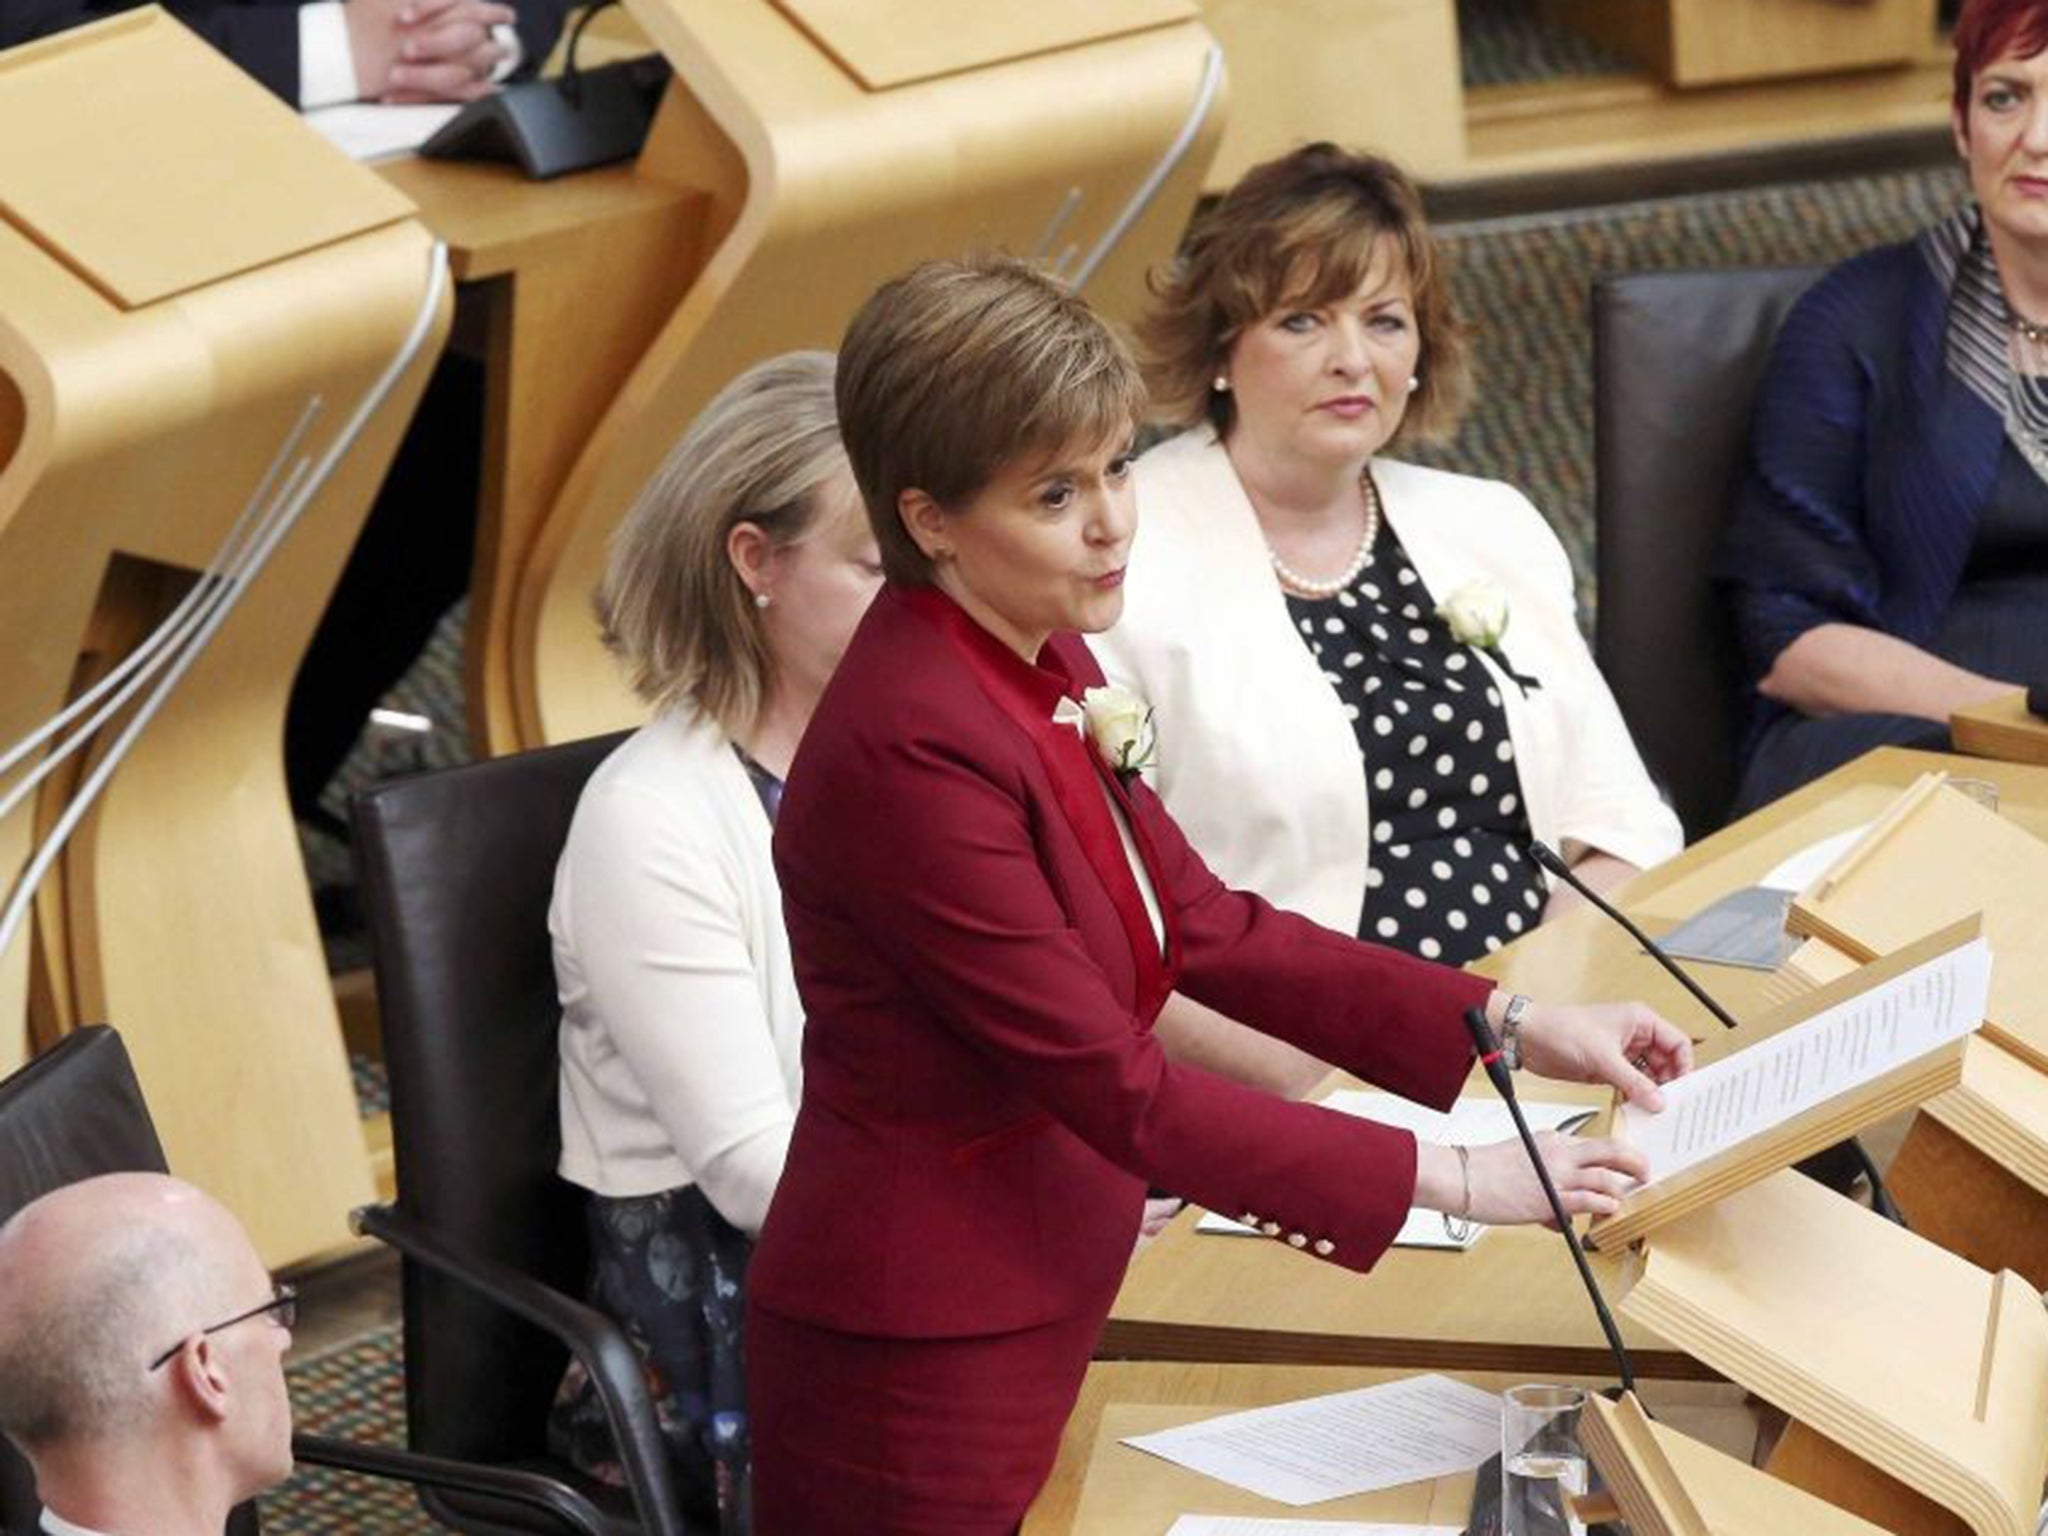 Nicola Sturgeon said she would listen to suggestions on how the Scottish Government could provide further reassurance to EU citizens in Scotland